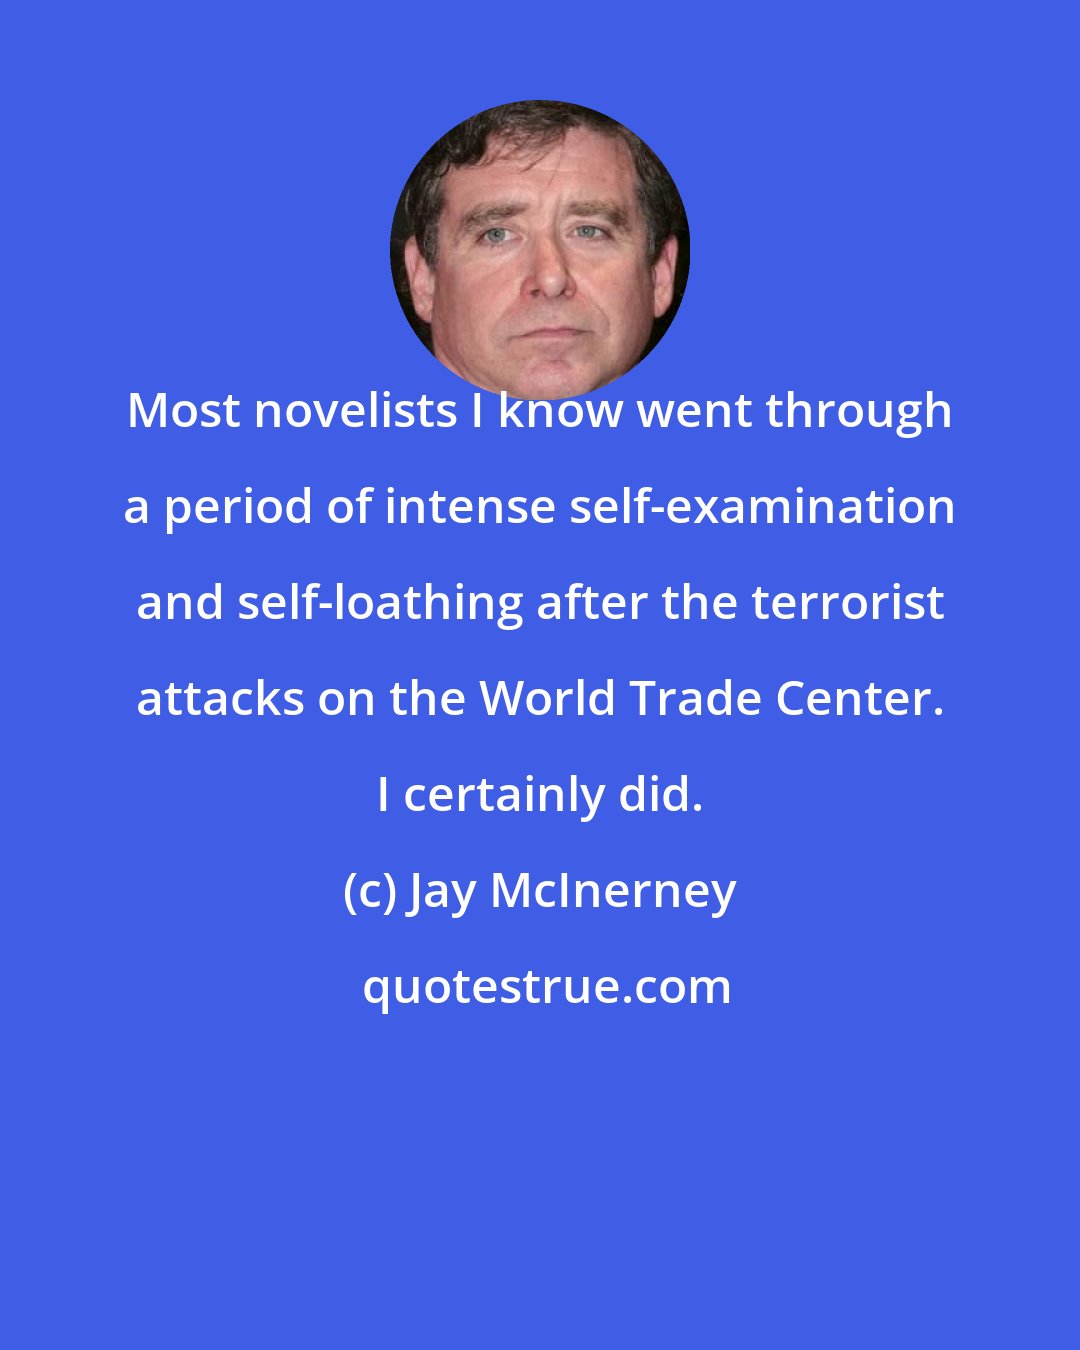 Jay McInerney: Most novelists I know went through a period of intense self-examination and self-loathing after the terrorist attacks on the World Trade Center. I certainly did.